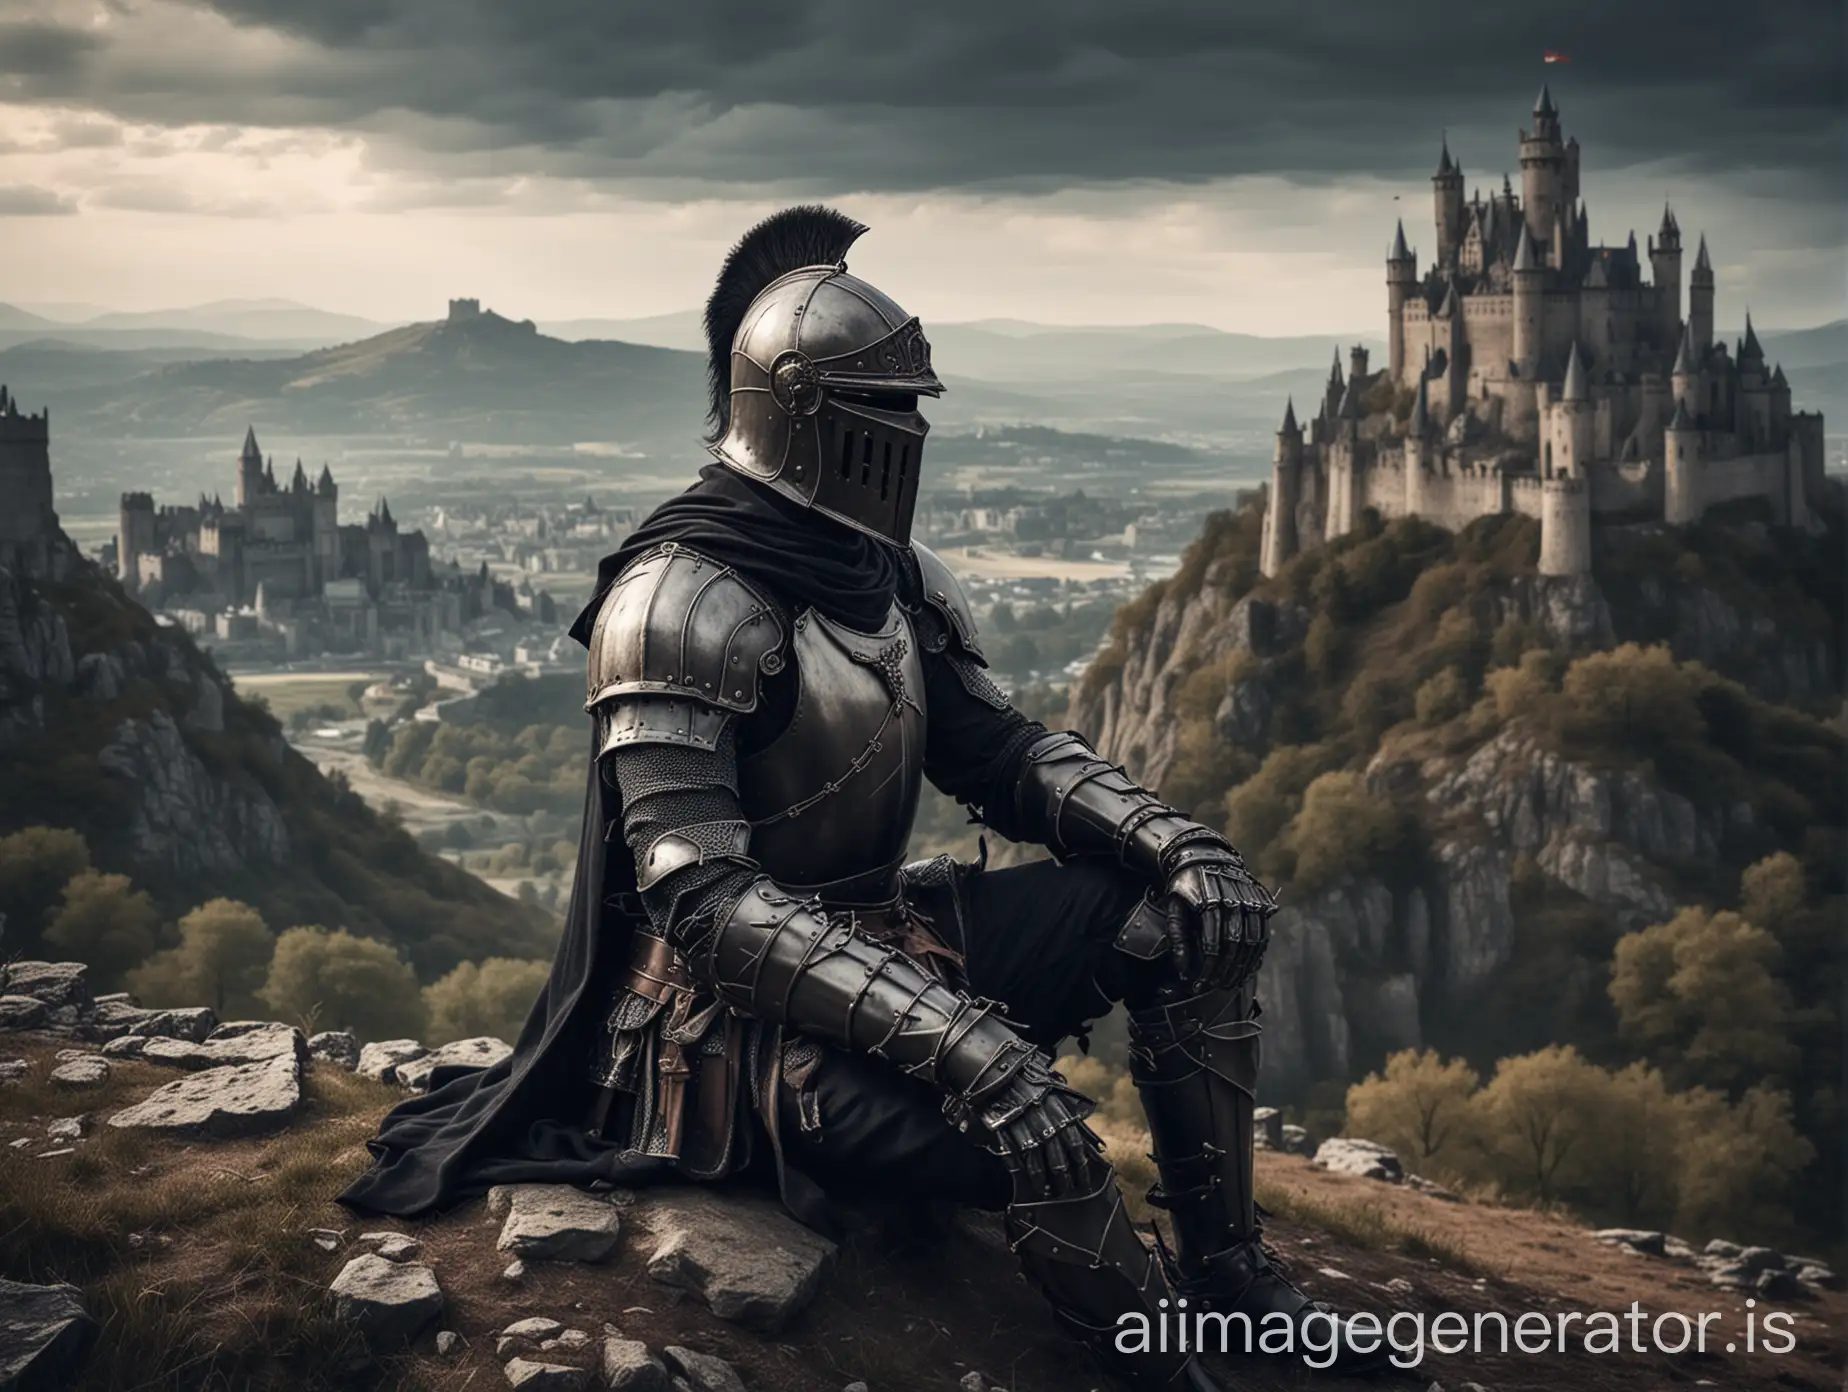 dark fantasy medeval knight with helmet  resting on hill with a castle in the background